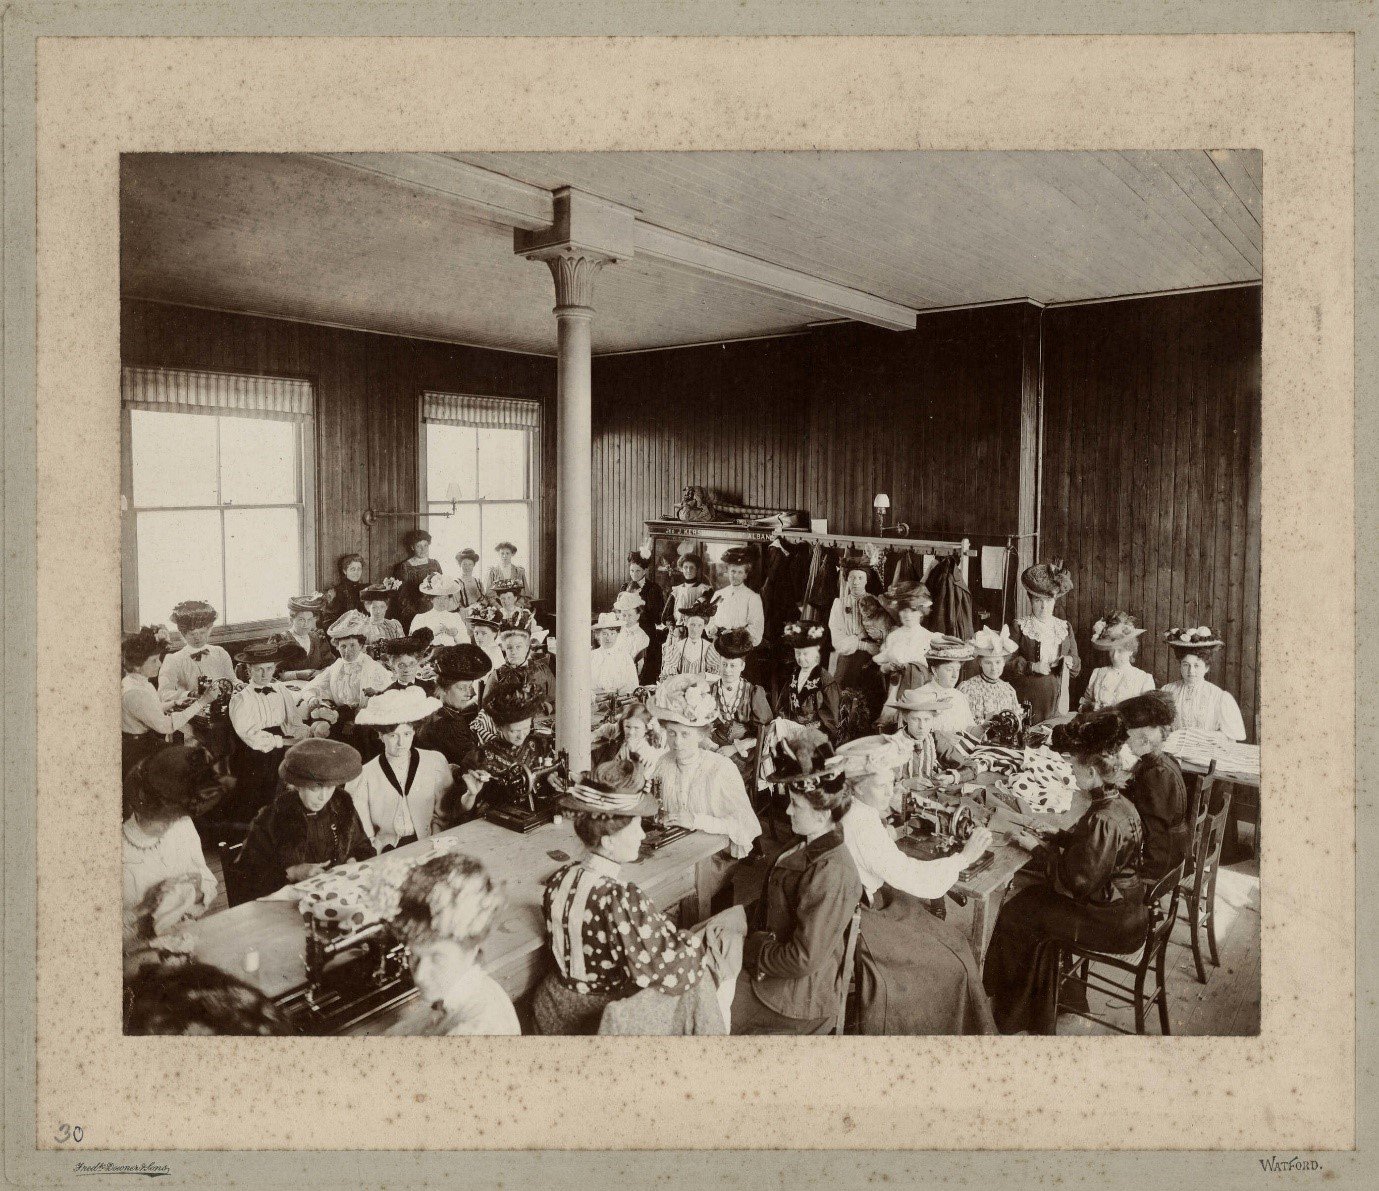 Costume-makers at the 1907 St Albans Pageant